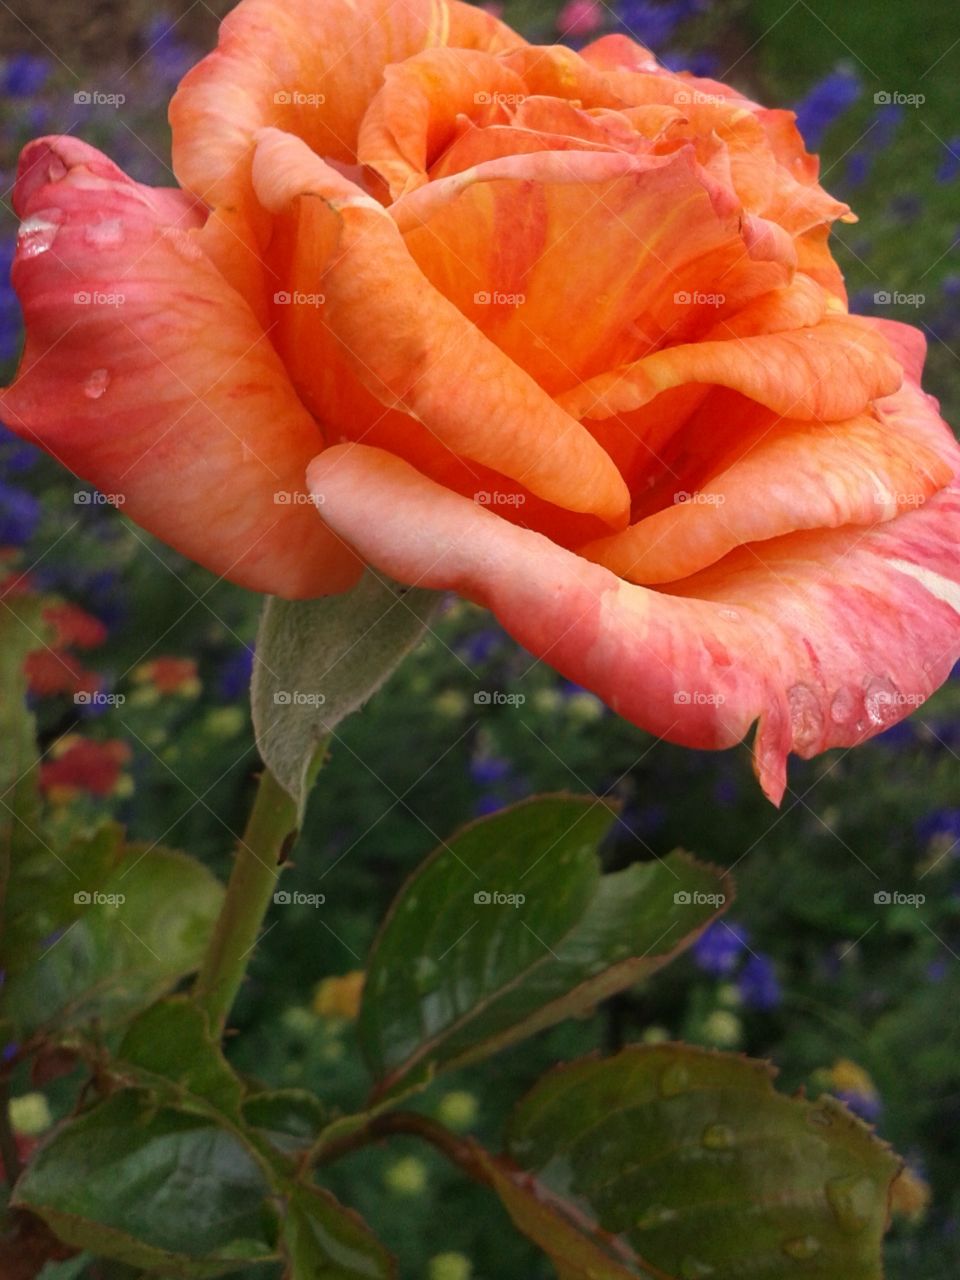 Brightest spot today.. The cloud cover doesn't stop this rose from glowing.